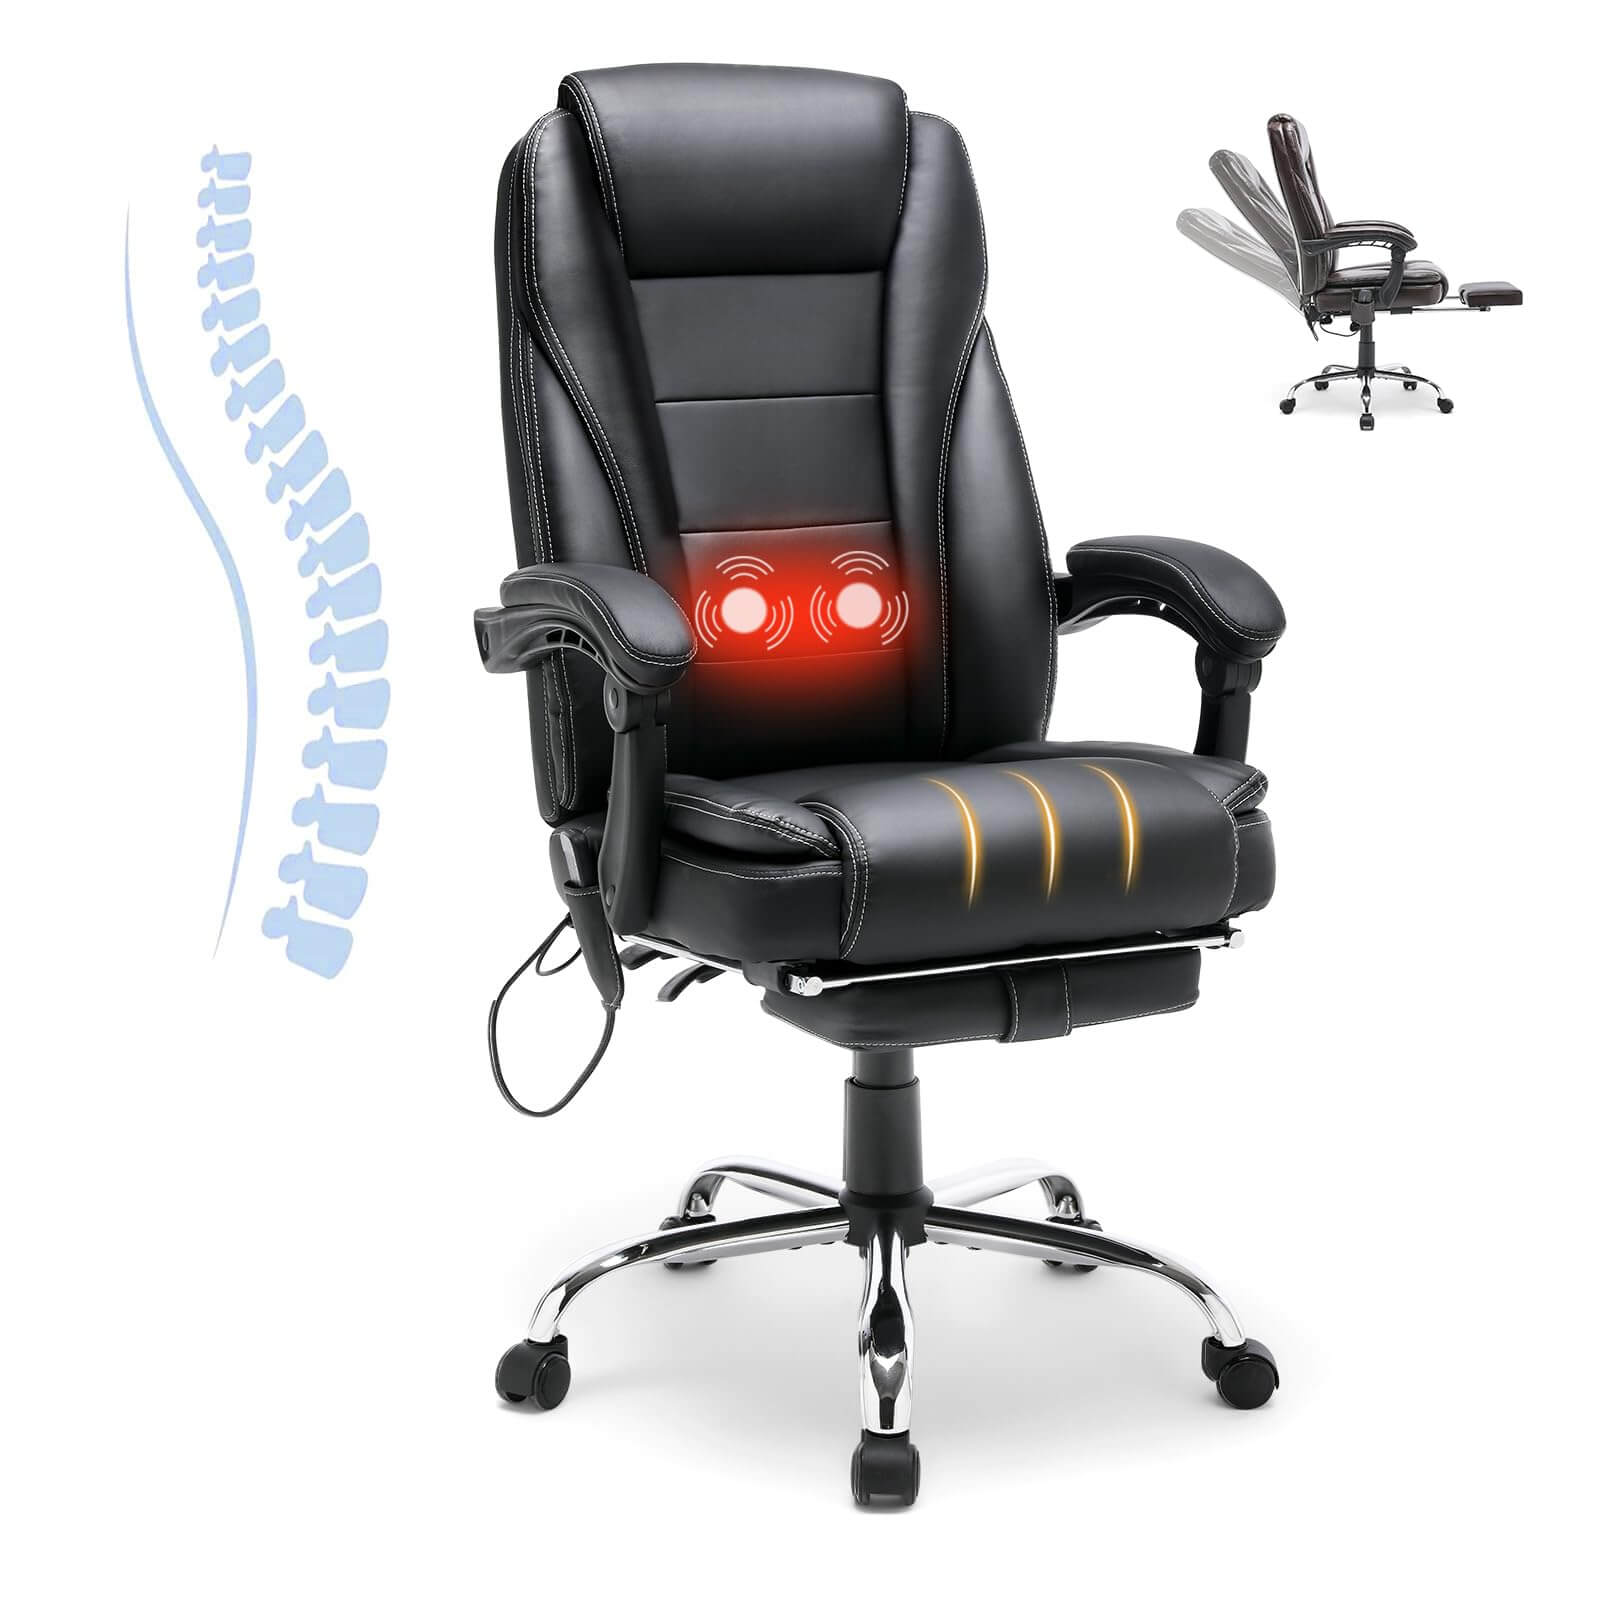 Ergonomic Office Chair with Footrest - Reclining Computer Desk Chair with  Wheels for Adults, Lumbar Support, Fixed Arm Rests, Adjustable Height